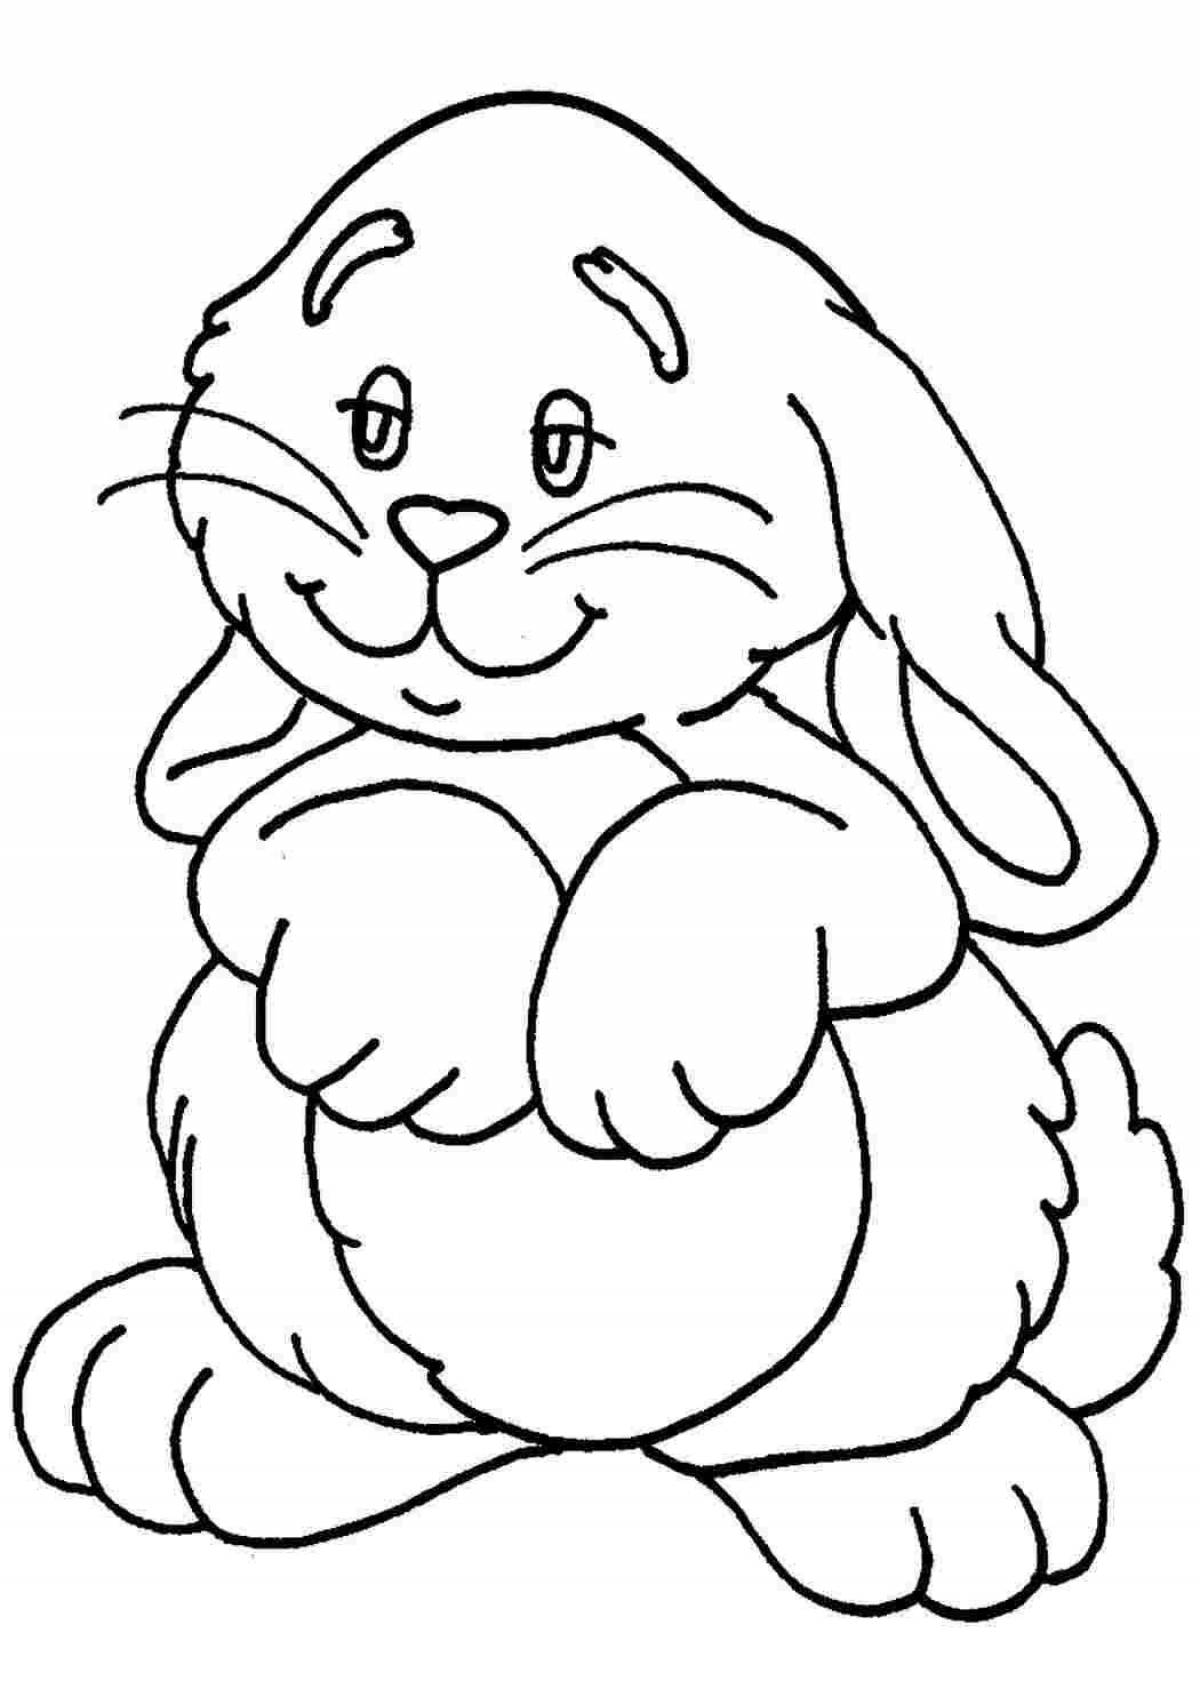 Animated rabbit coloring book for kids 3 4